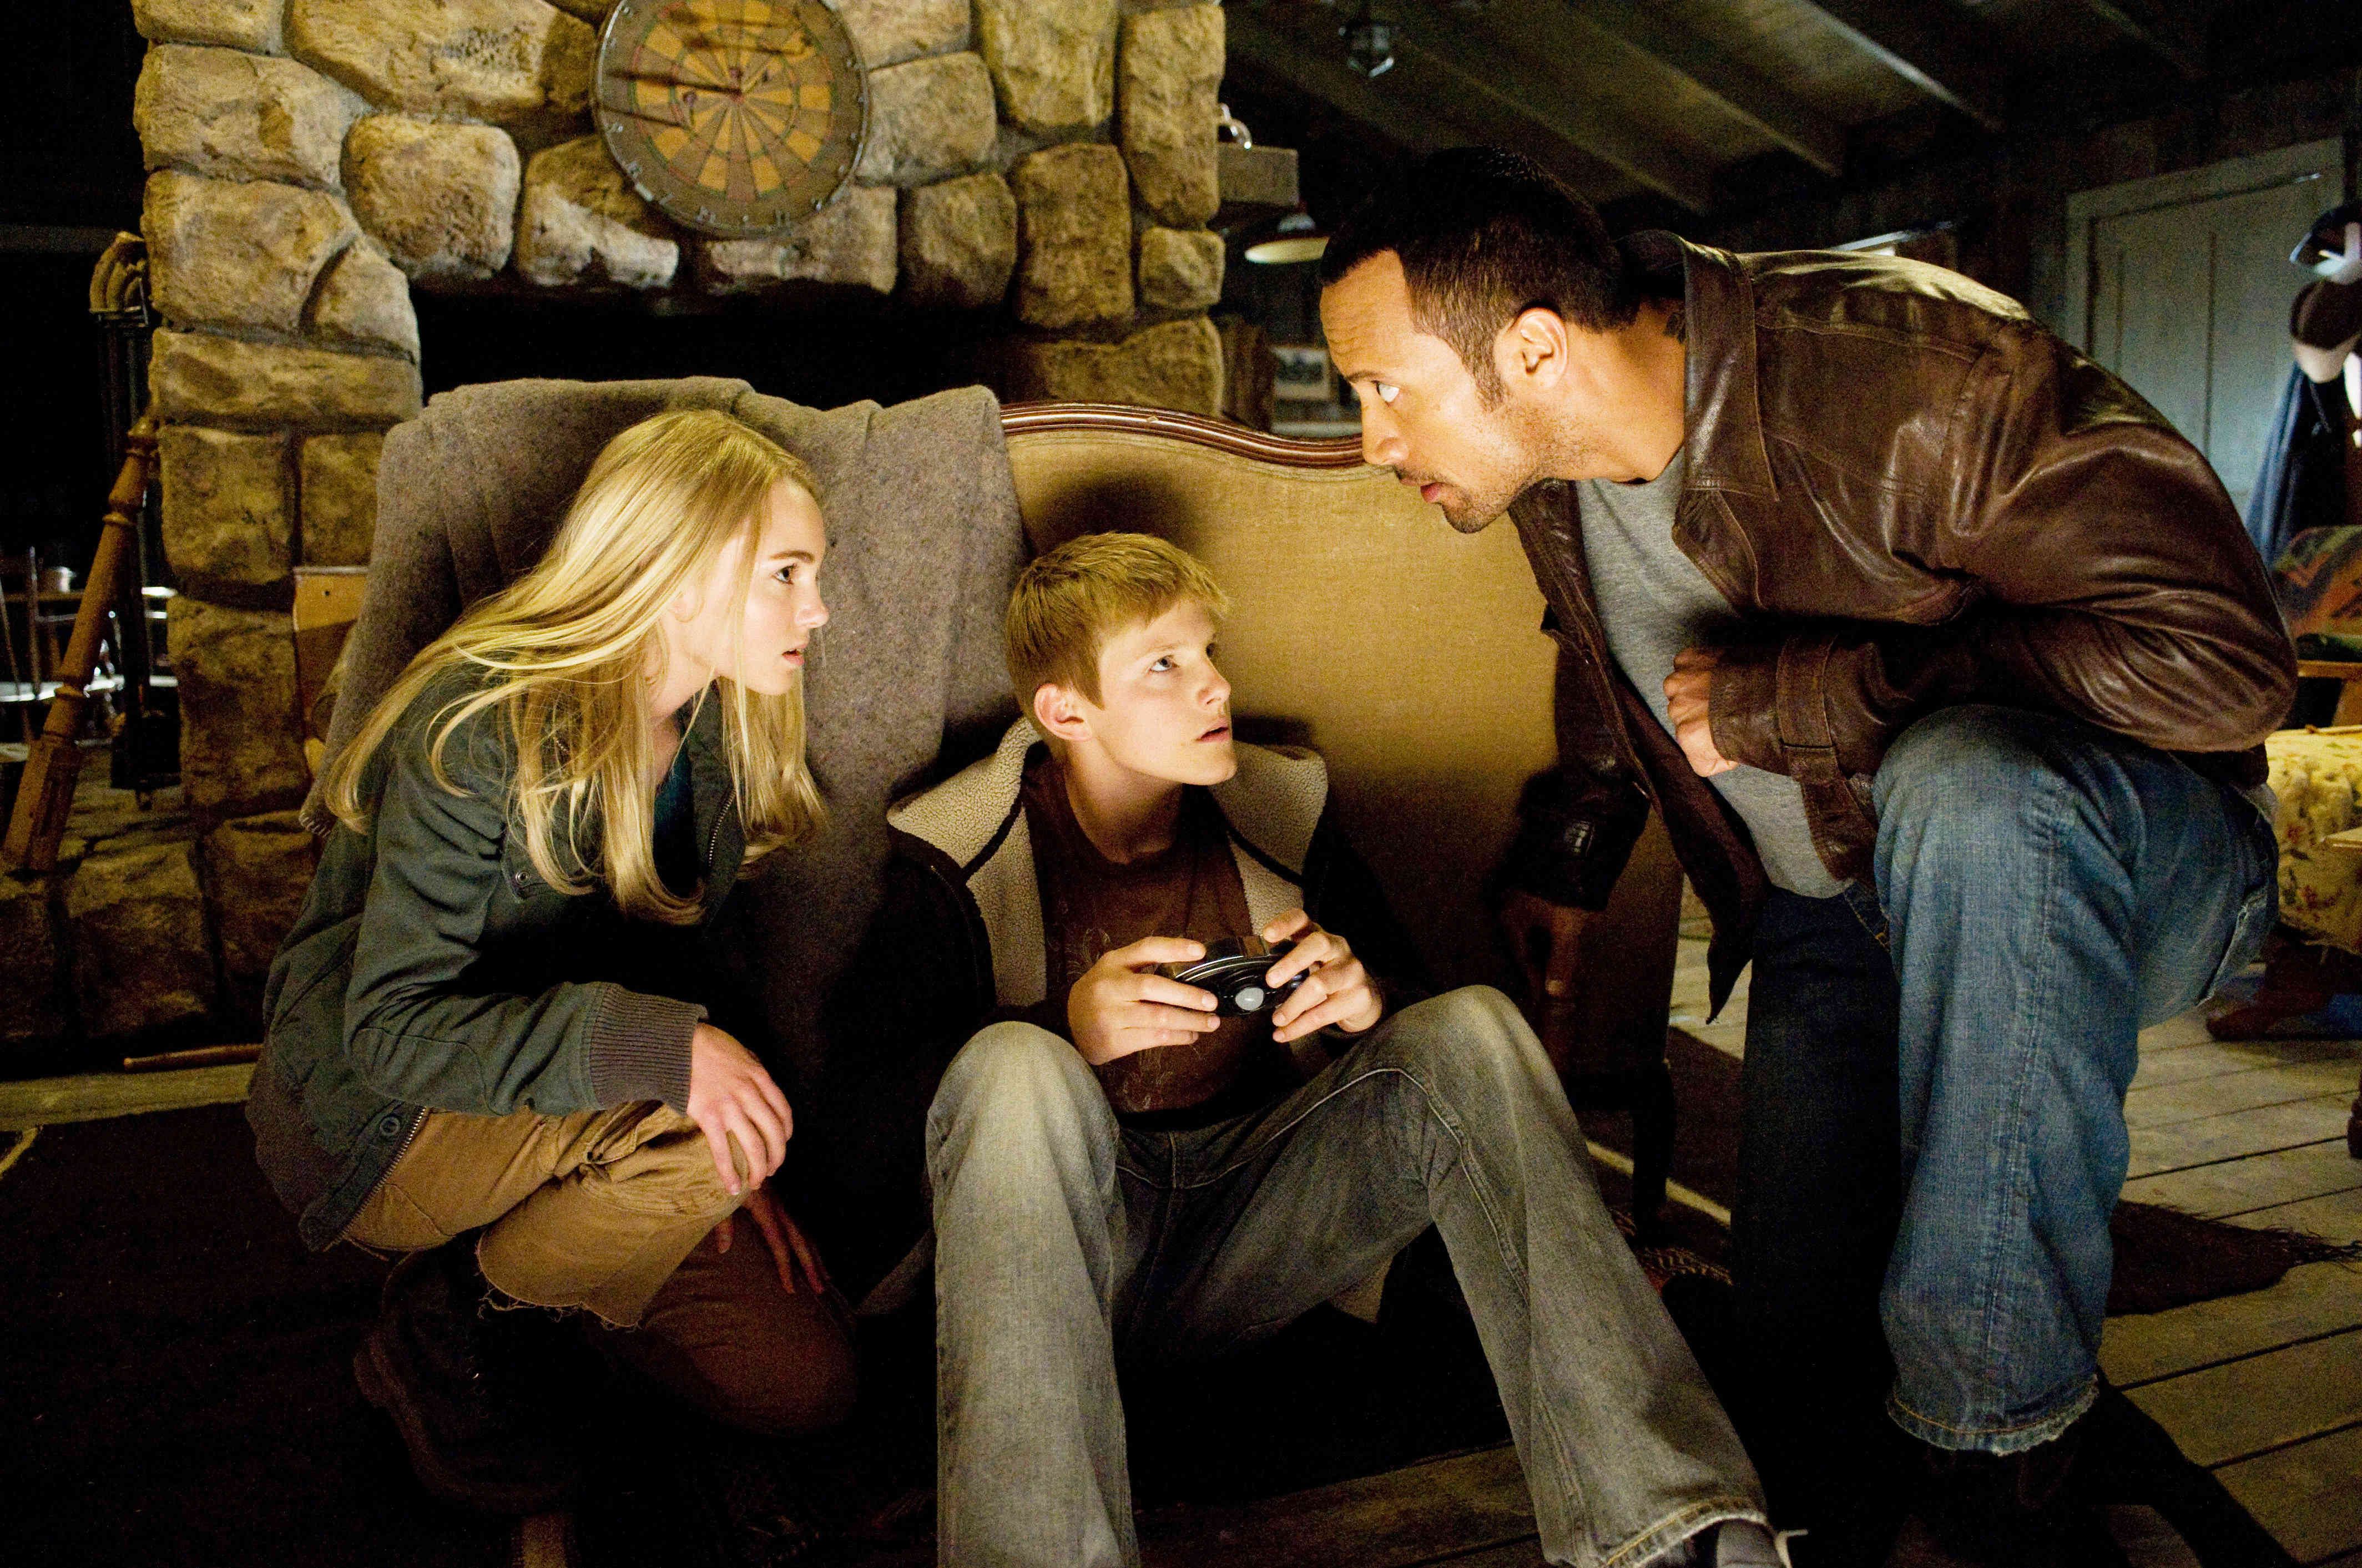 AnnaSophia Robb, Alexander Ludwig and The Rock in Walt Disney Pictures' Race to Witch Mountain (2009)